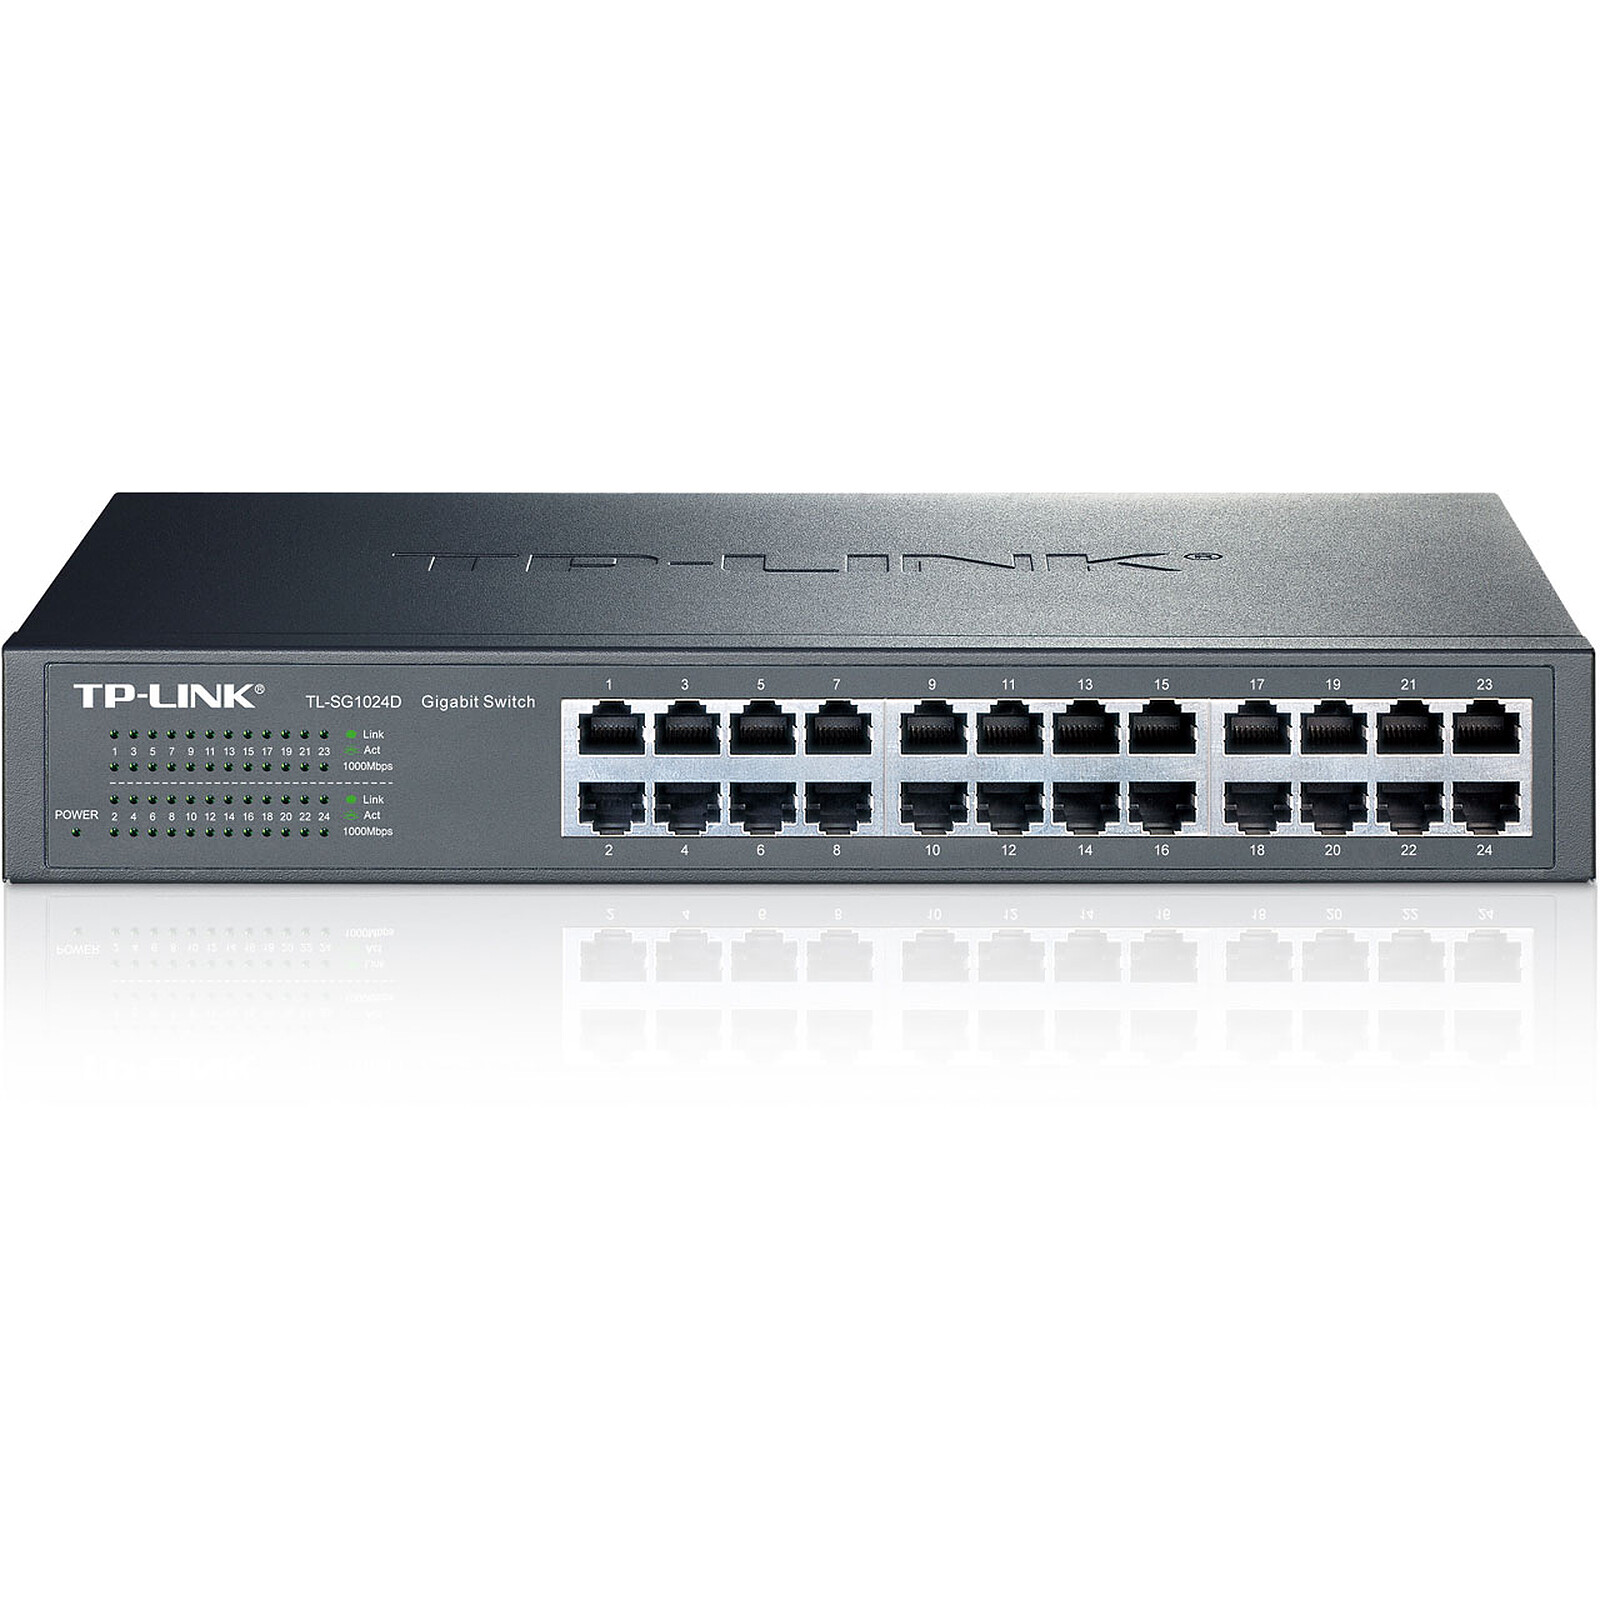 TP-LINK TL-SG1024D - Network switch - LDLC 3-year warranty